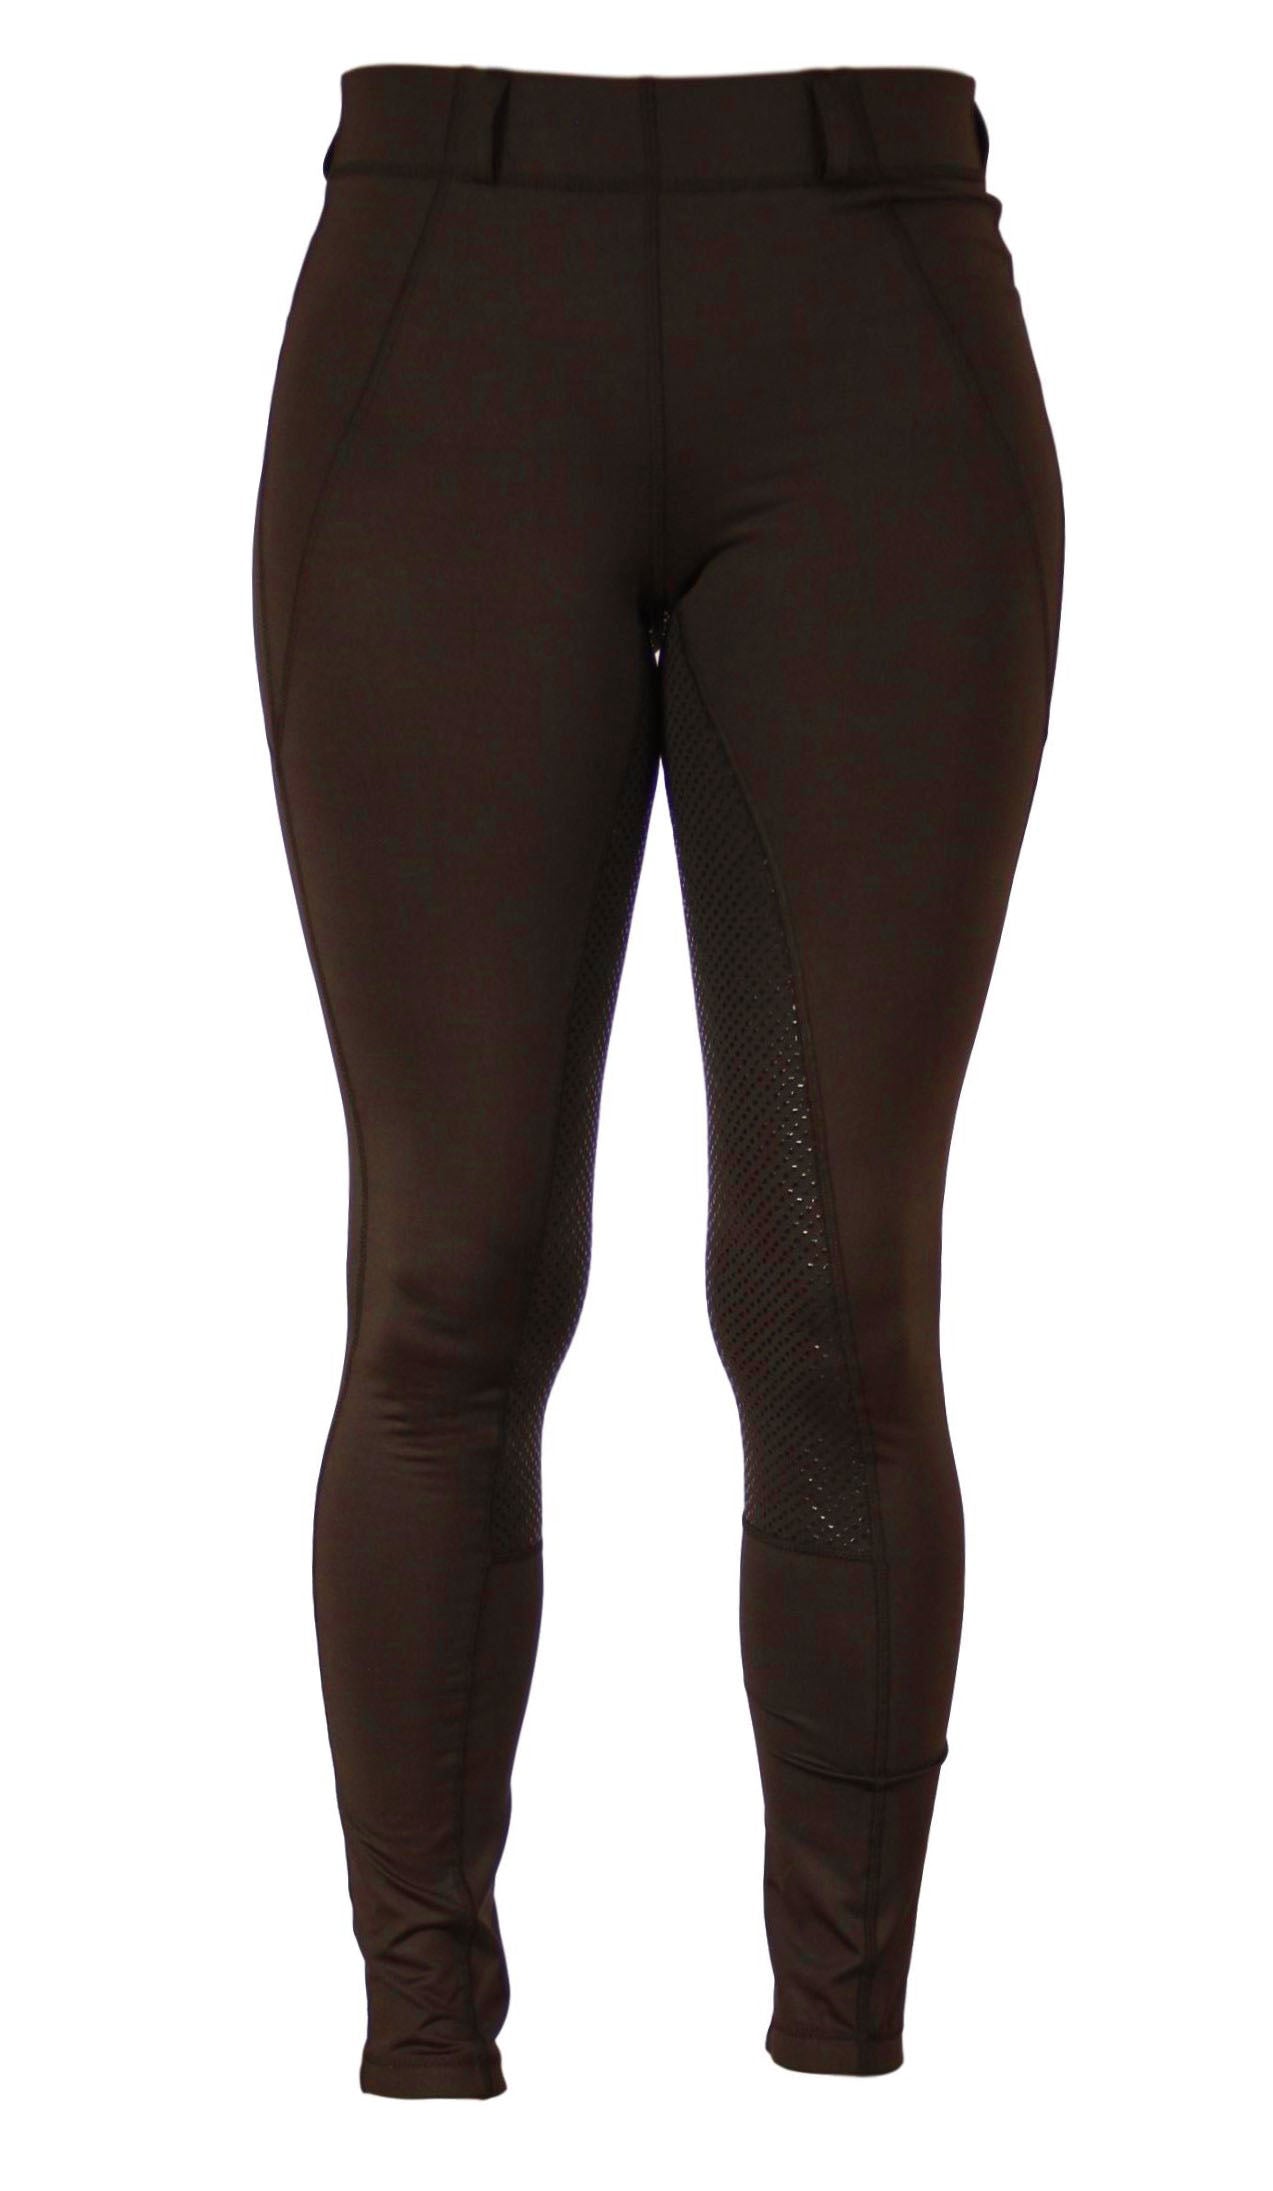 Brown horse riding tights with mesh panels, isolated on white background.